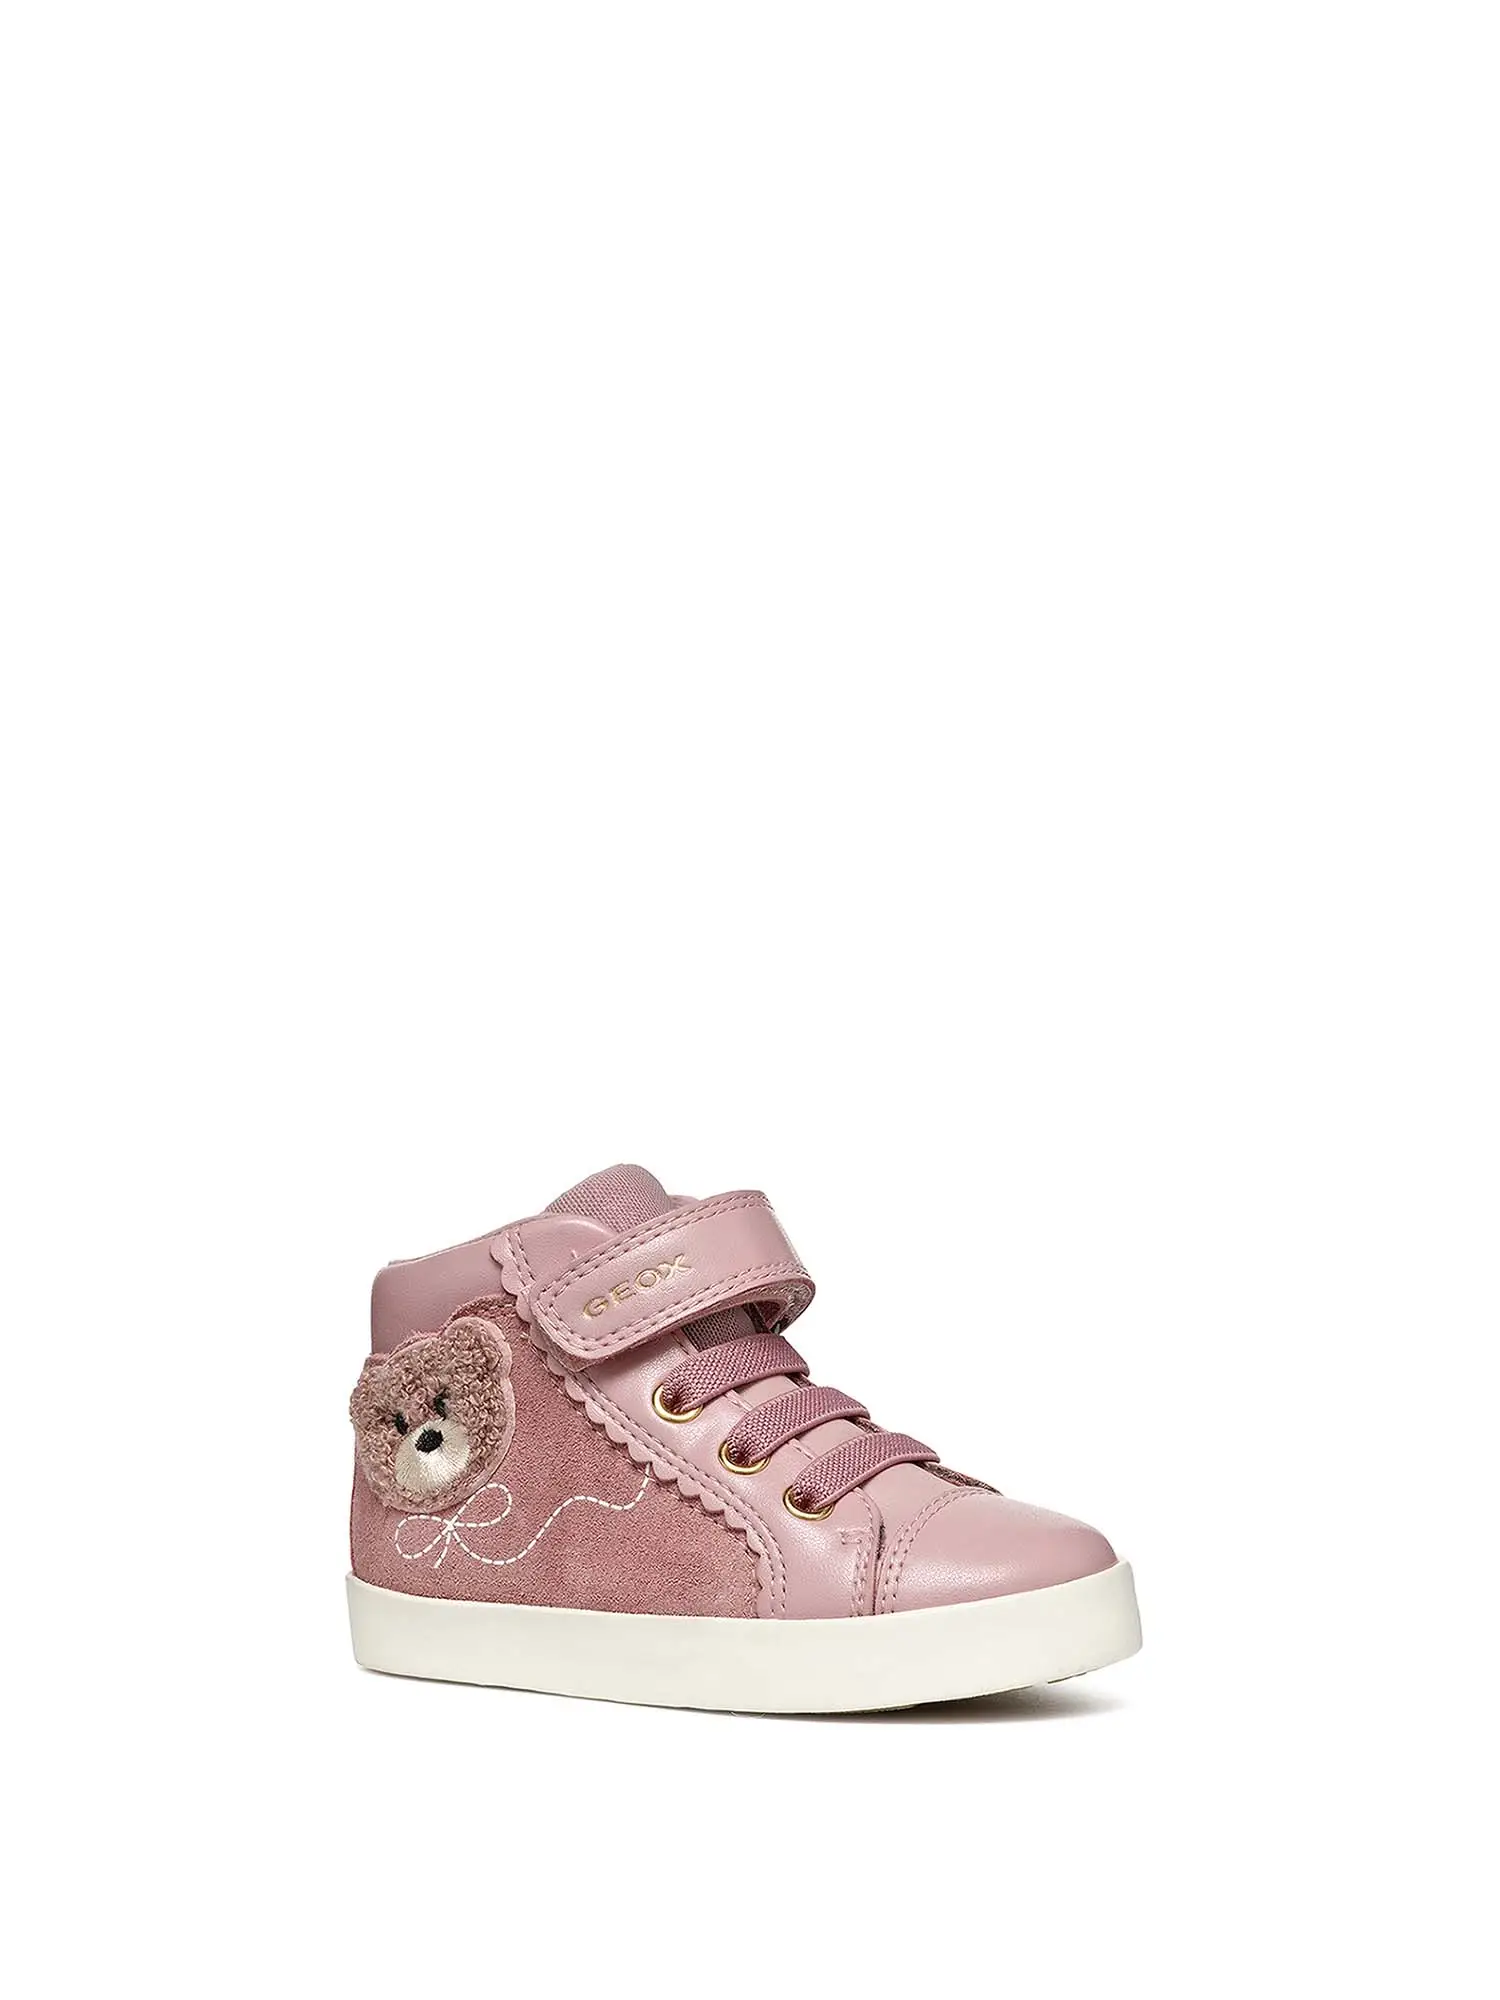 SNEAKERS BAMBINA - GEOX - B46D5A 022NF - ROSA, 25